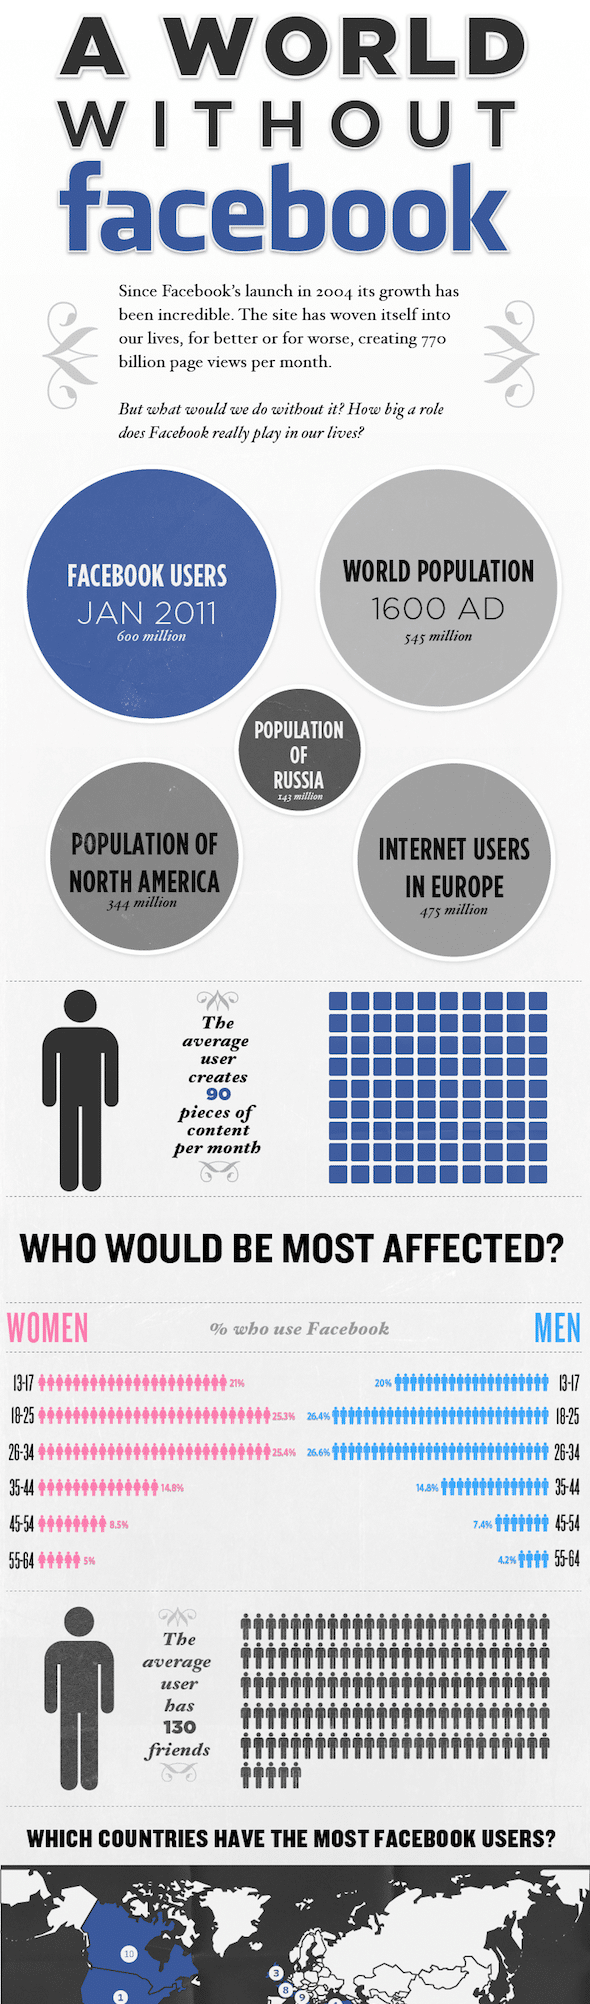 A World Without Facebook Infographic